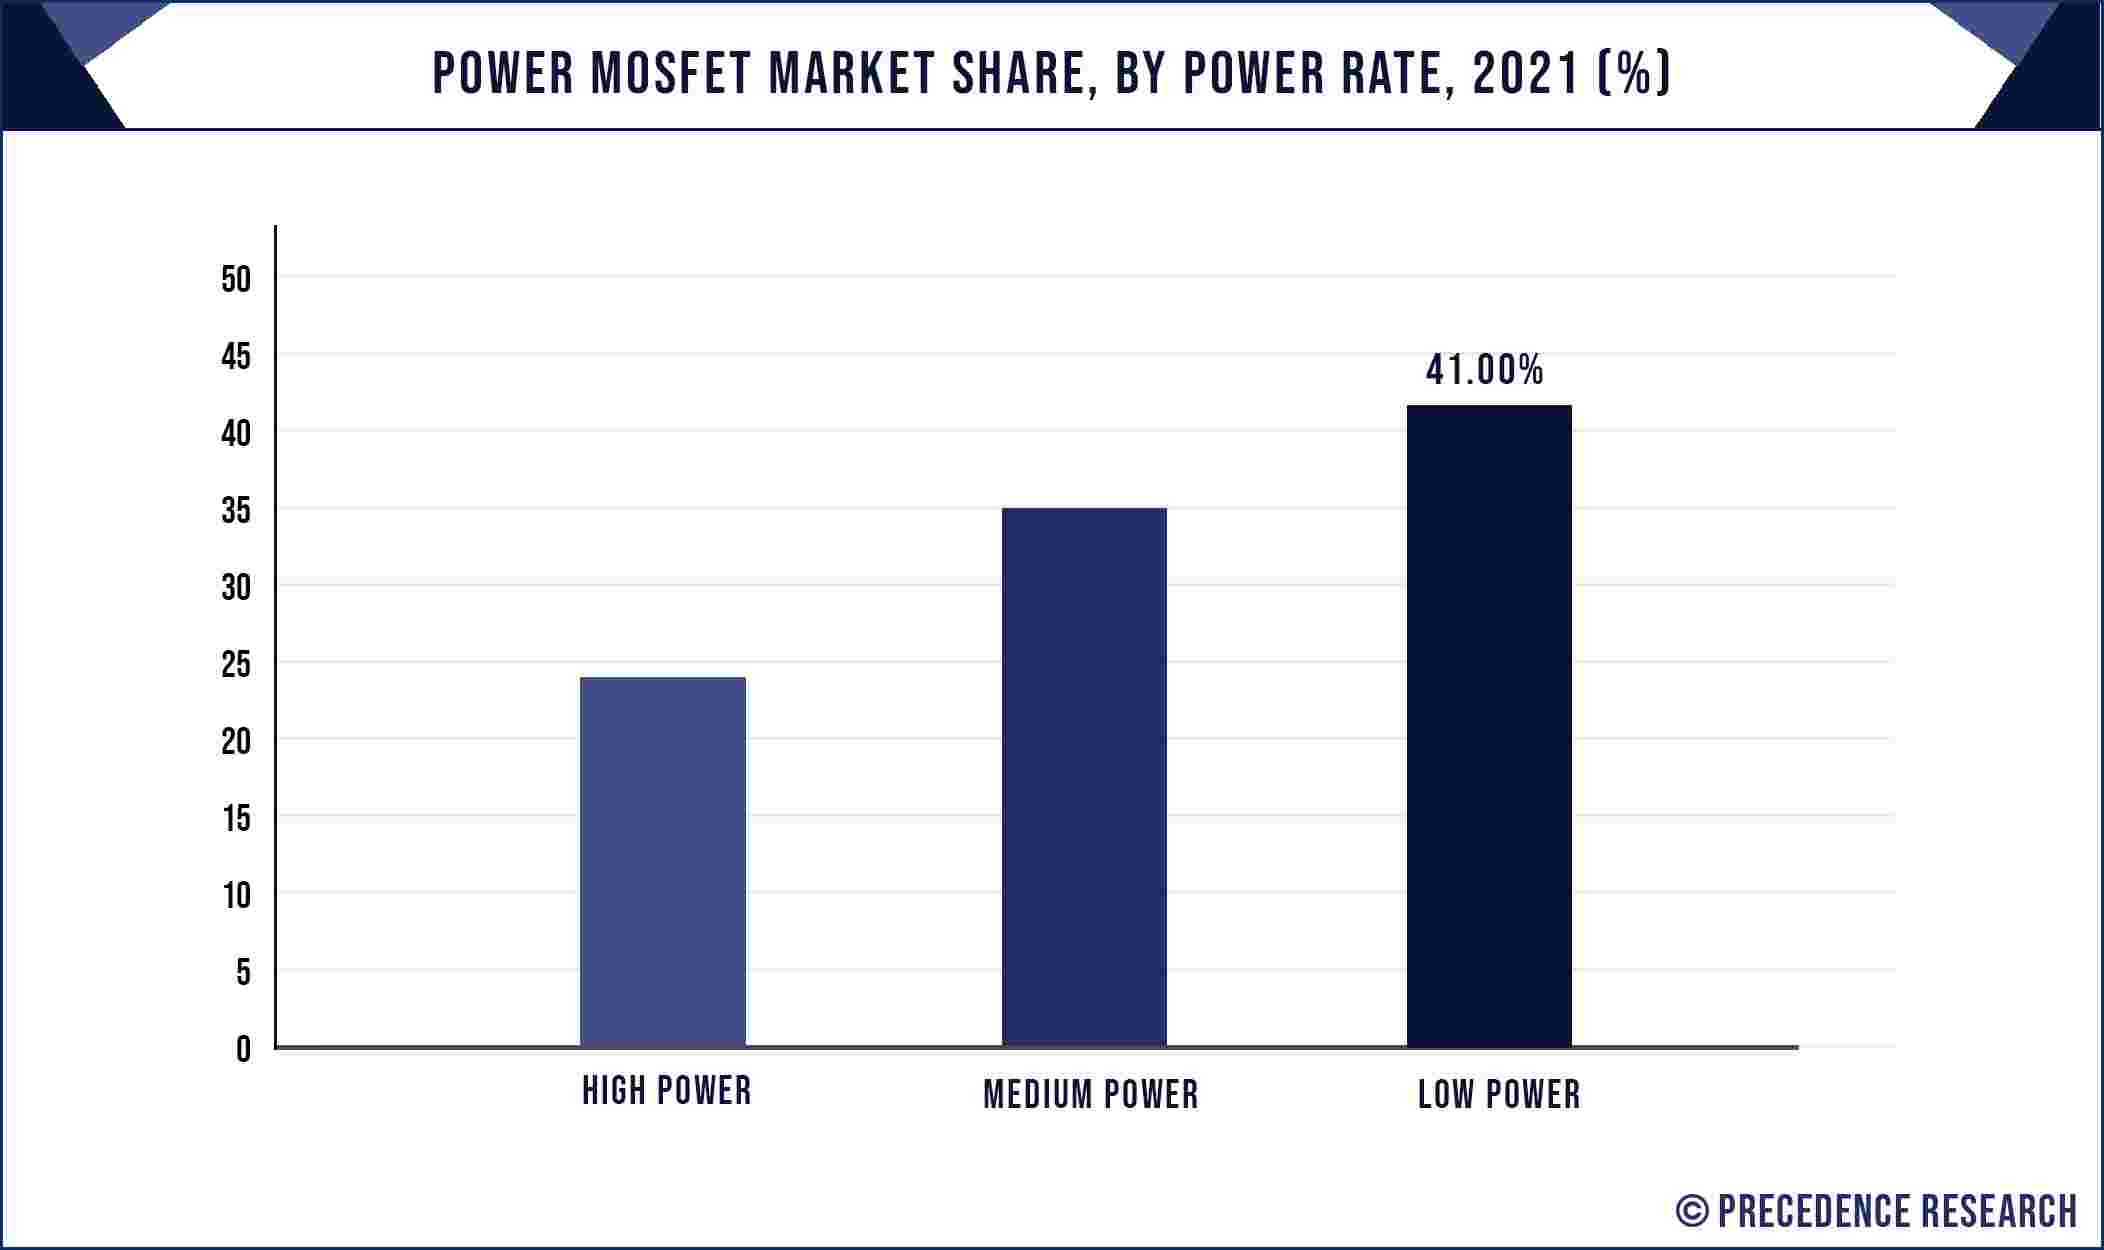 Power MOSFET Market Share, By Power Rate, 2021 (%)